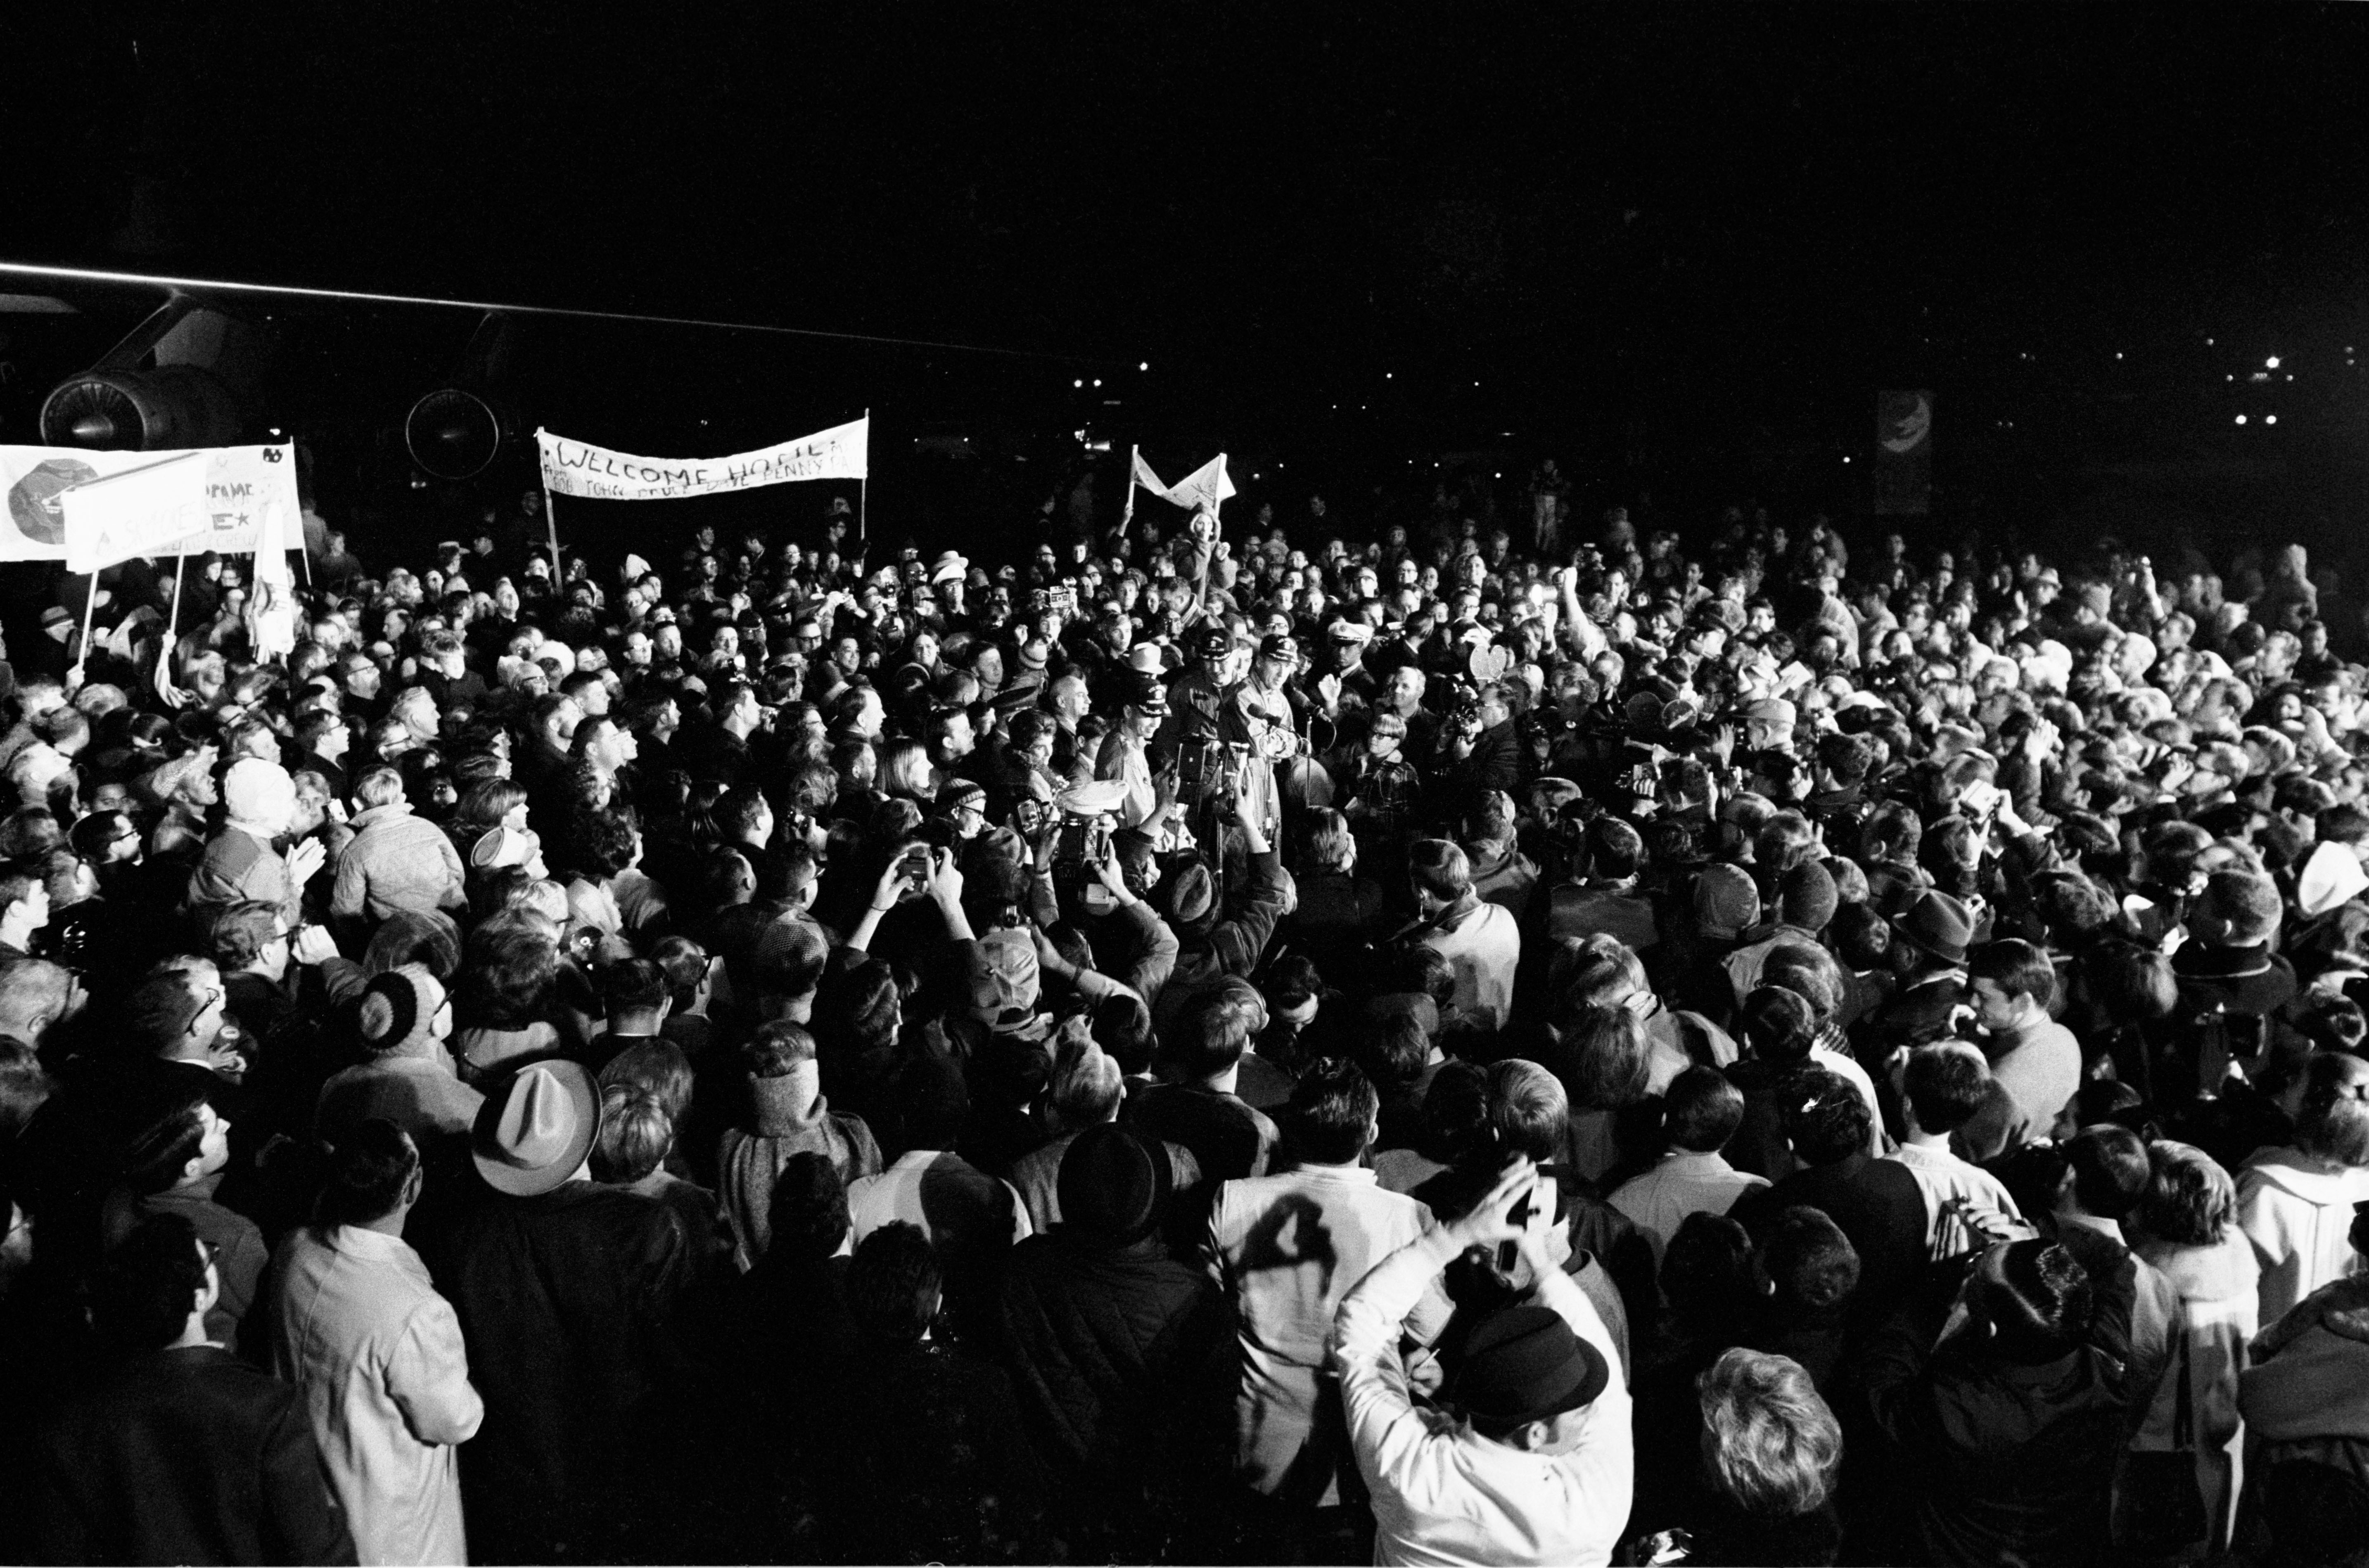 Although it was past 2 a.m., a crew of more than 2,000 people were on hand at Ellington Air Force Base to welcome the members of the Apollo 8 crew back home. Astronauts Frank Borman, James A. Lovell Jr., and William A. Anders had just flown to Houston from the pacific recovery area by way of Hawaii. The three crewmen of the historic Apollo 8 lunar orbit mission are standing at the microphones in center of picture. Photo Number: S69-16402 Date: December 29, 1968 